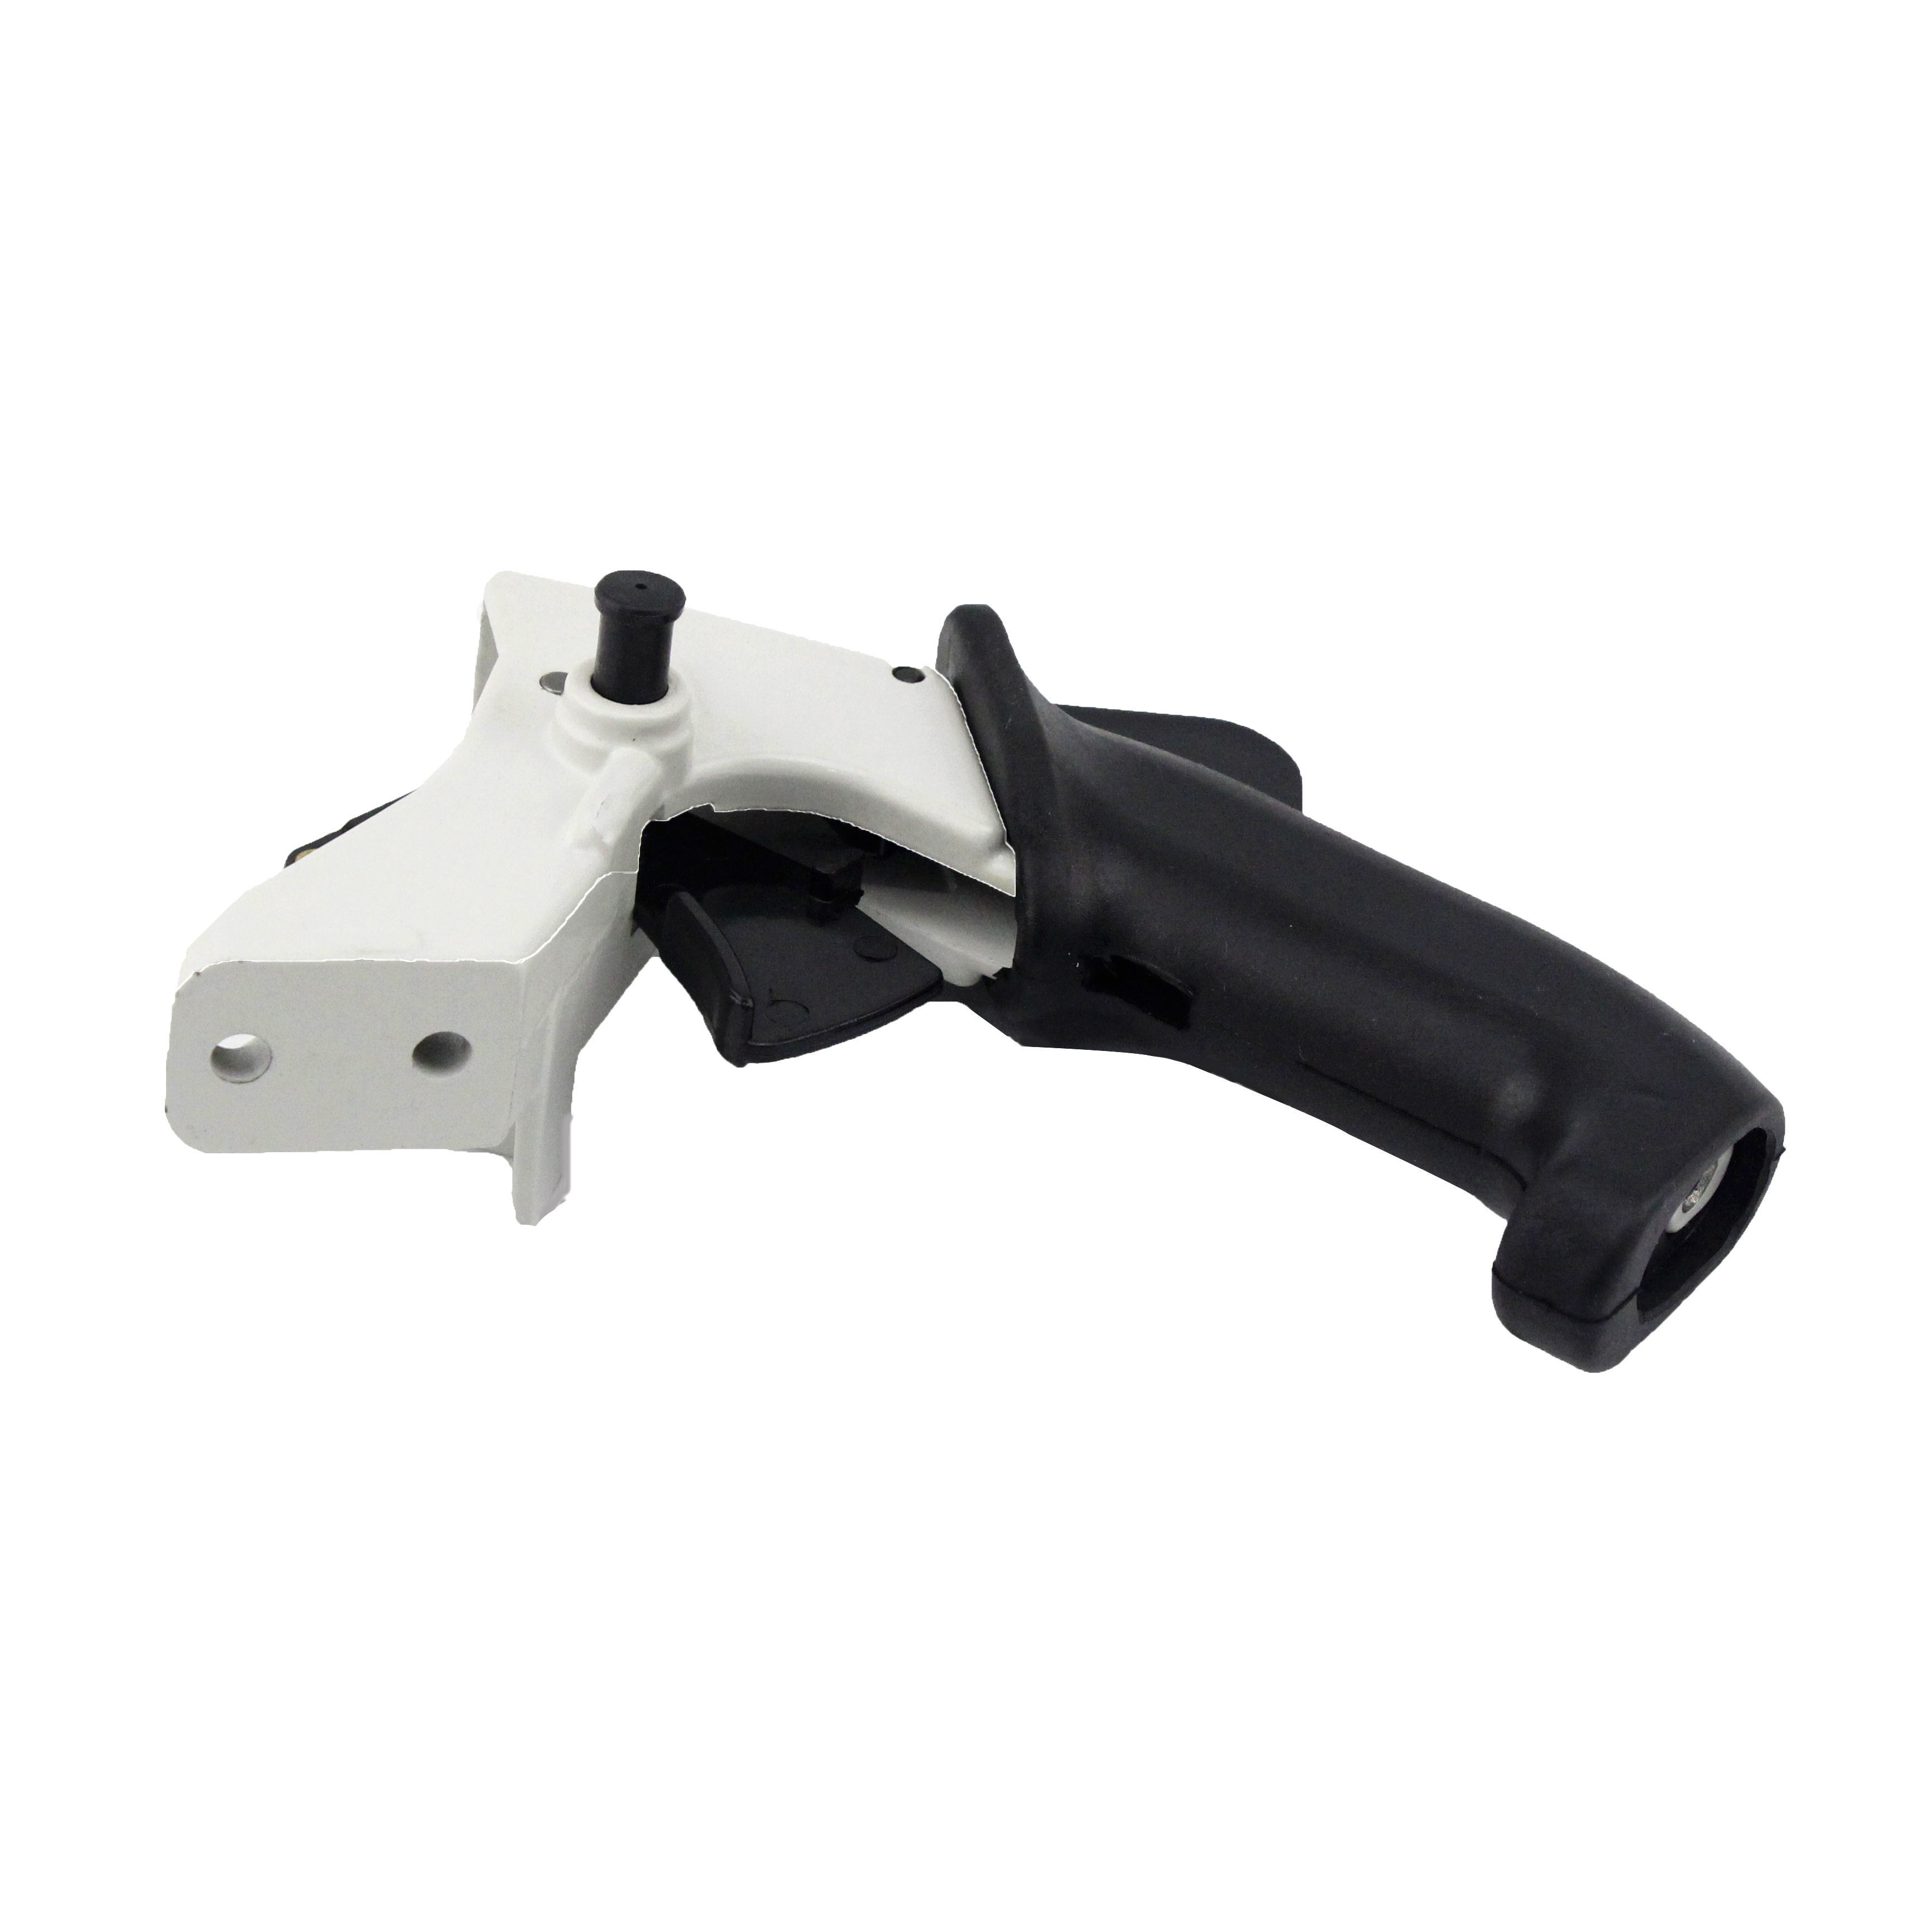 Rubber Grip Back Rear handle Assembly For Stihl 070 090 Chainsaw With Bracket OEM# 1106 790 0302, 1106 791 2205